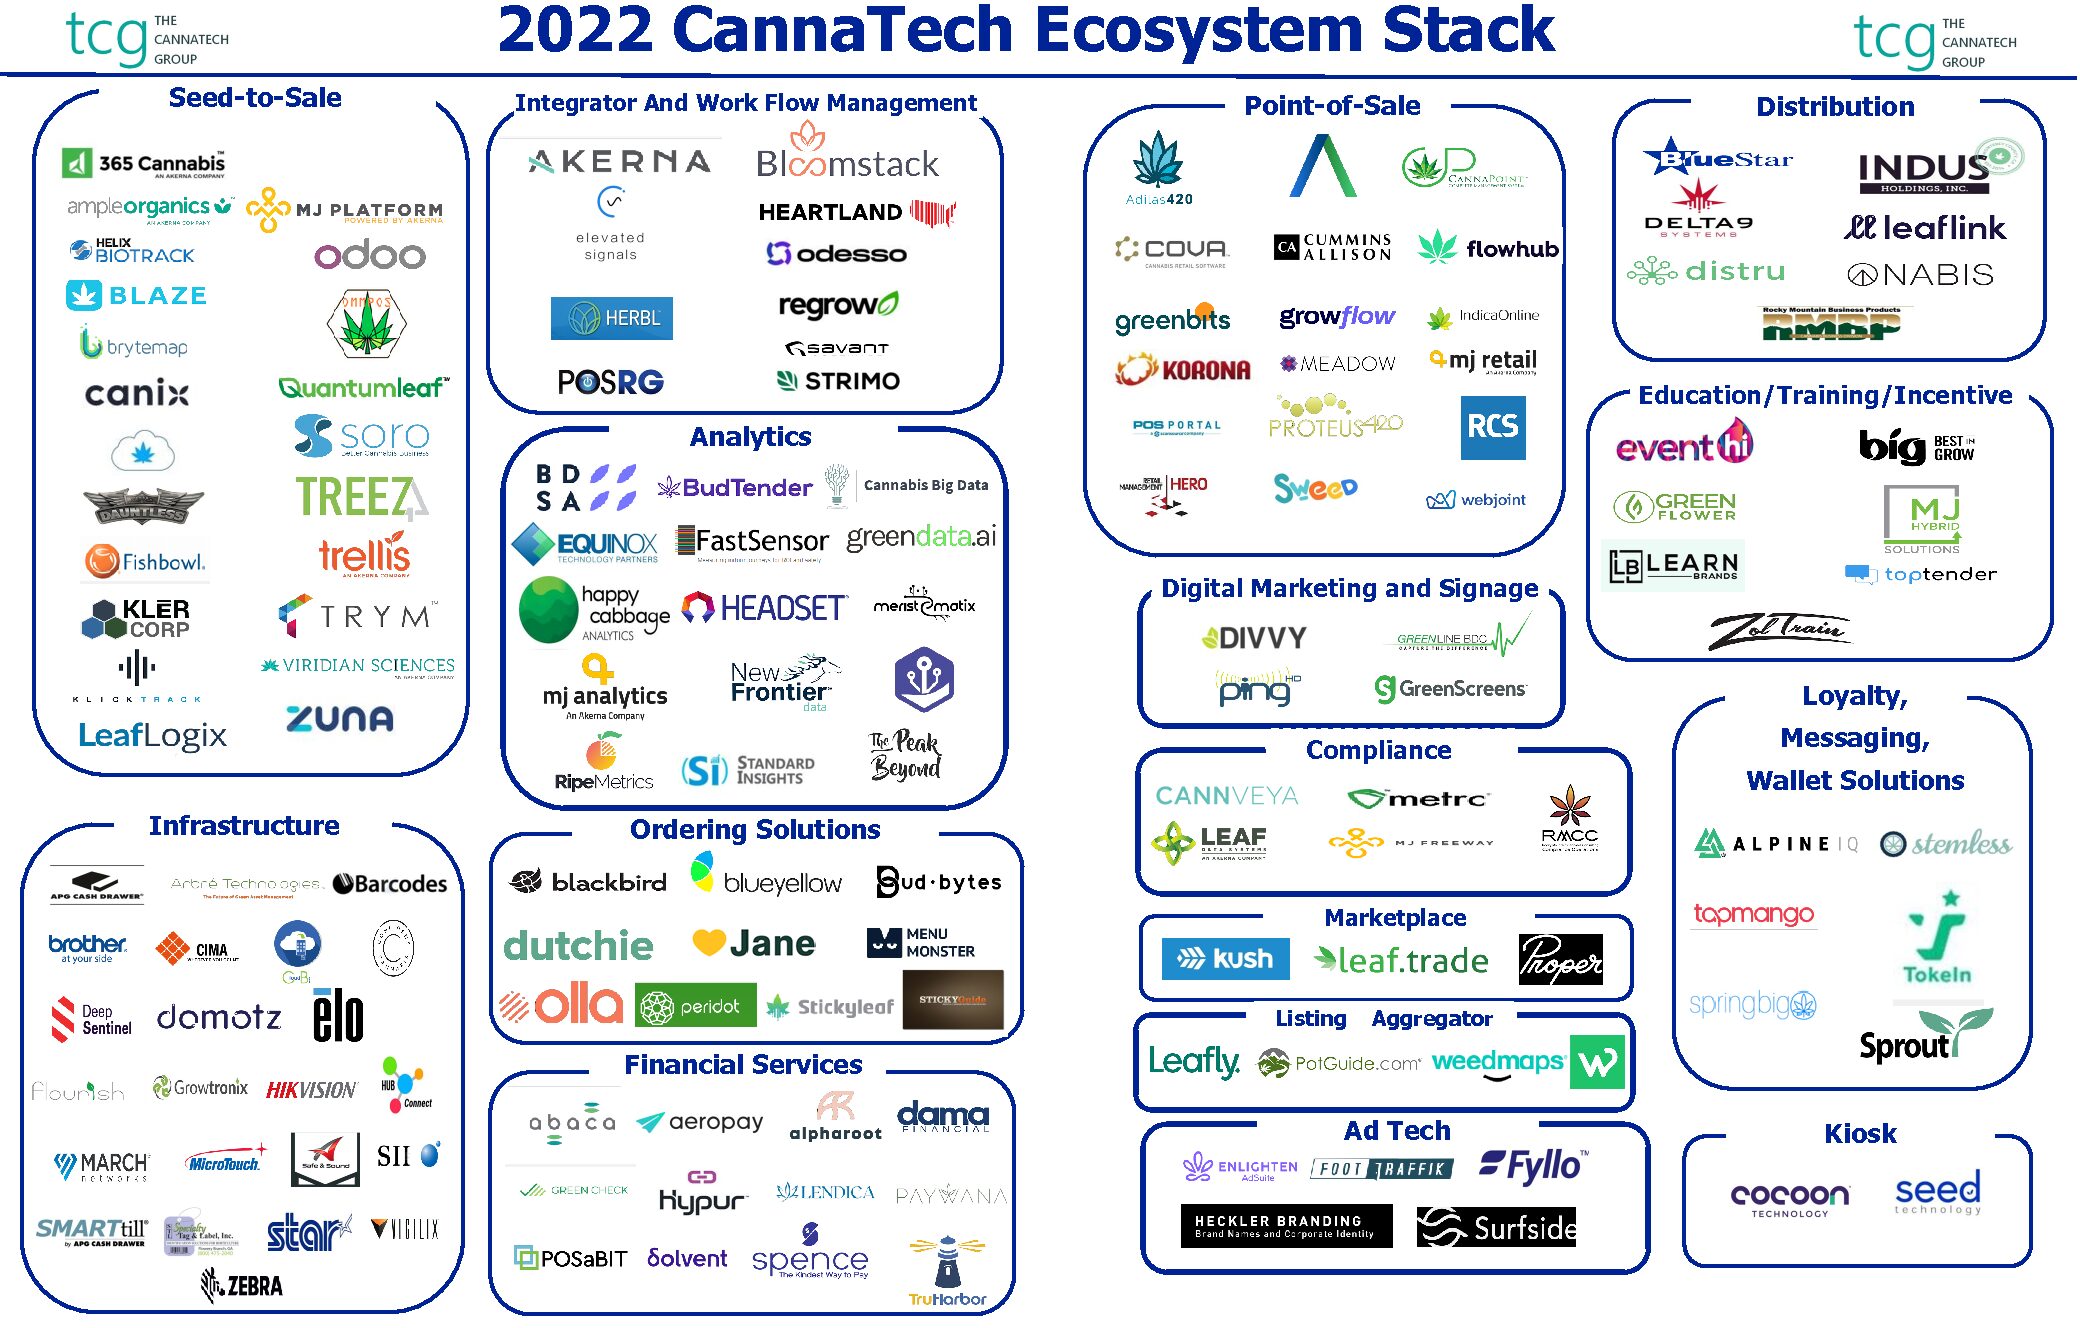 The 2022 CannaTech Ecosystem Stack